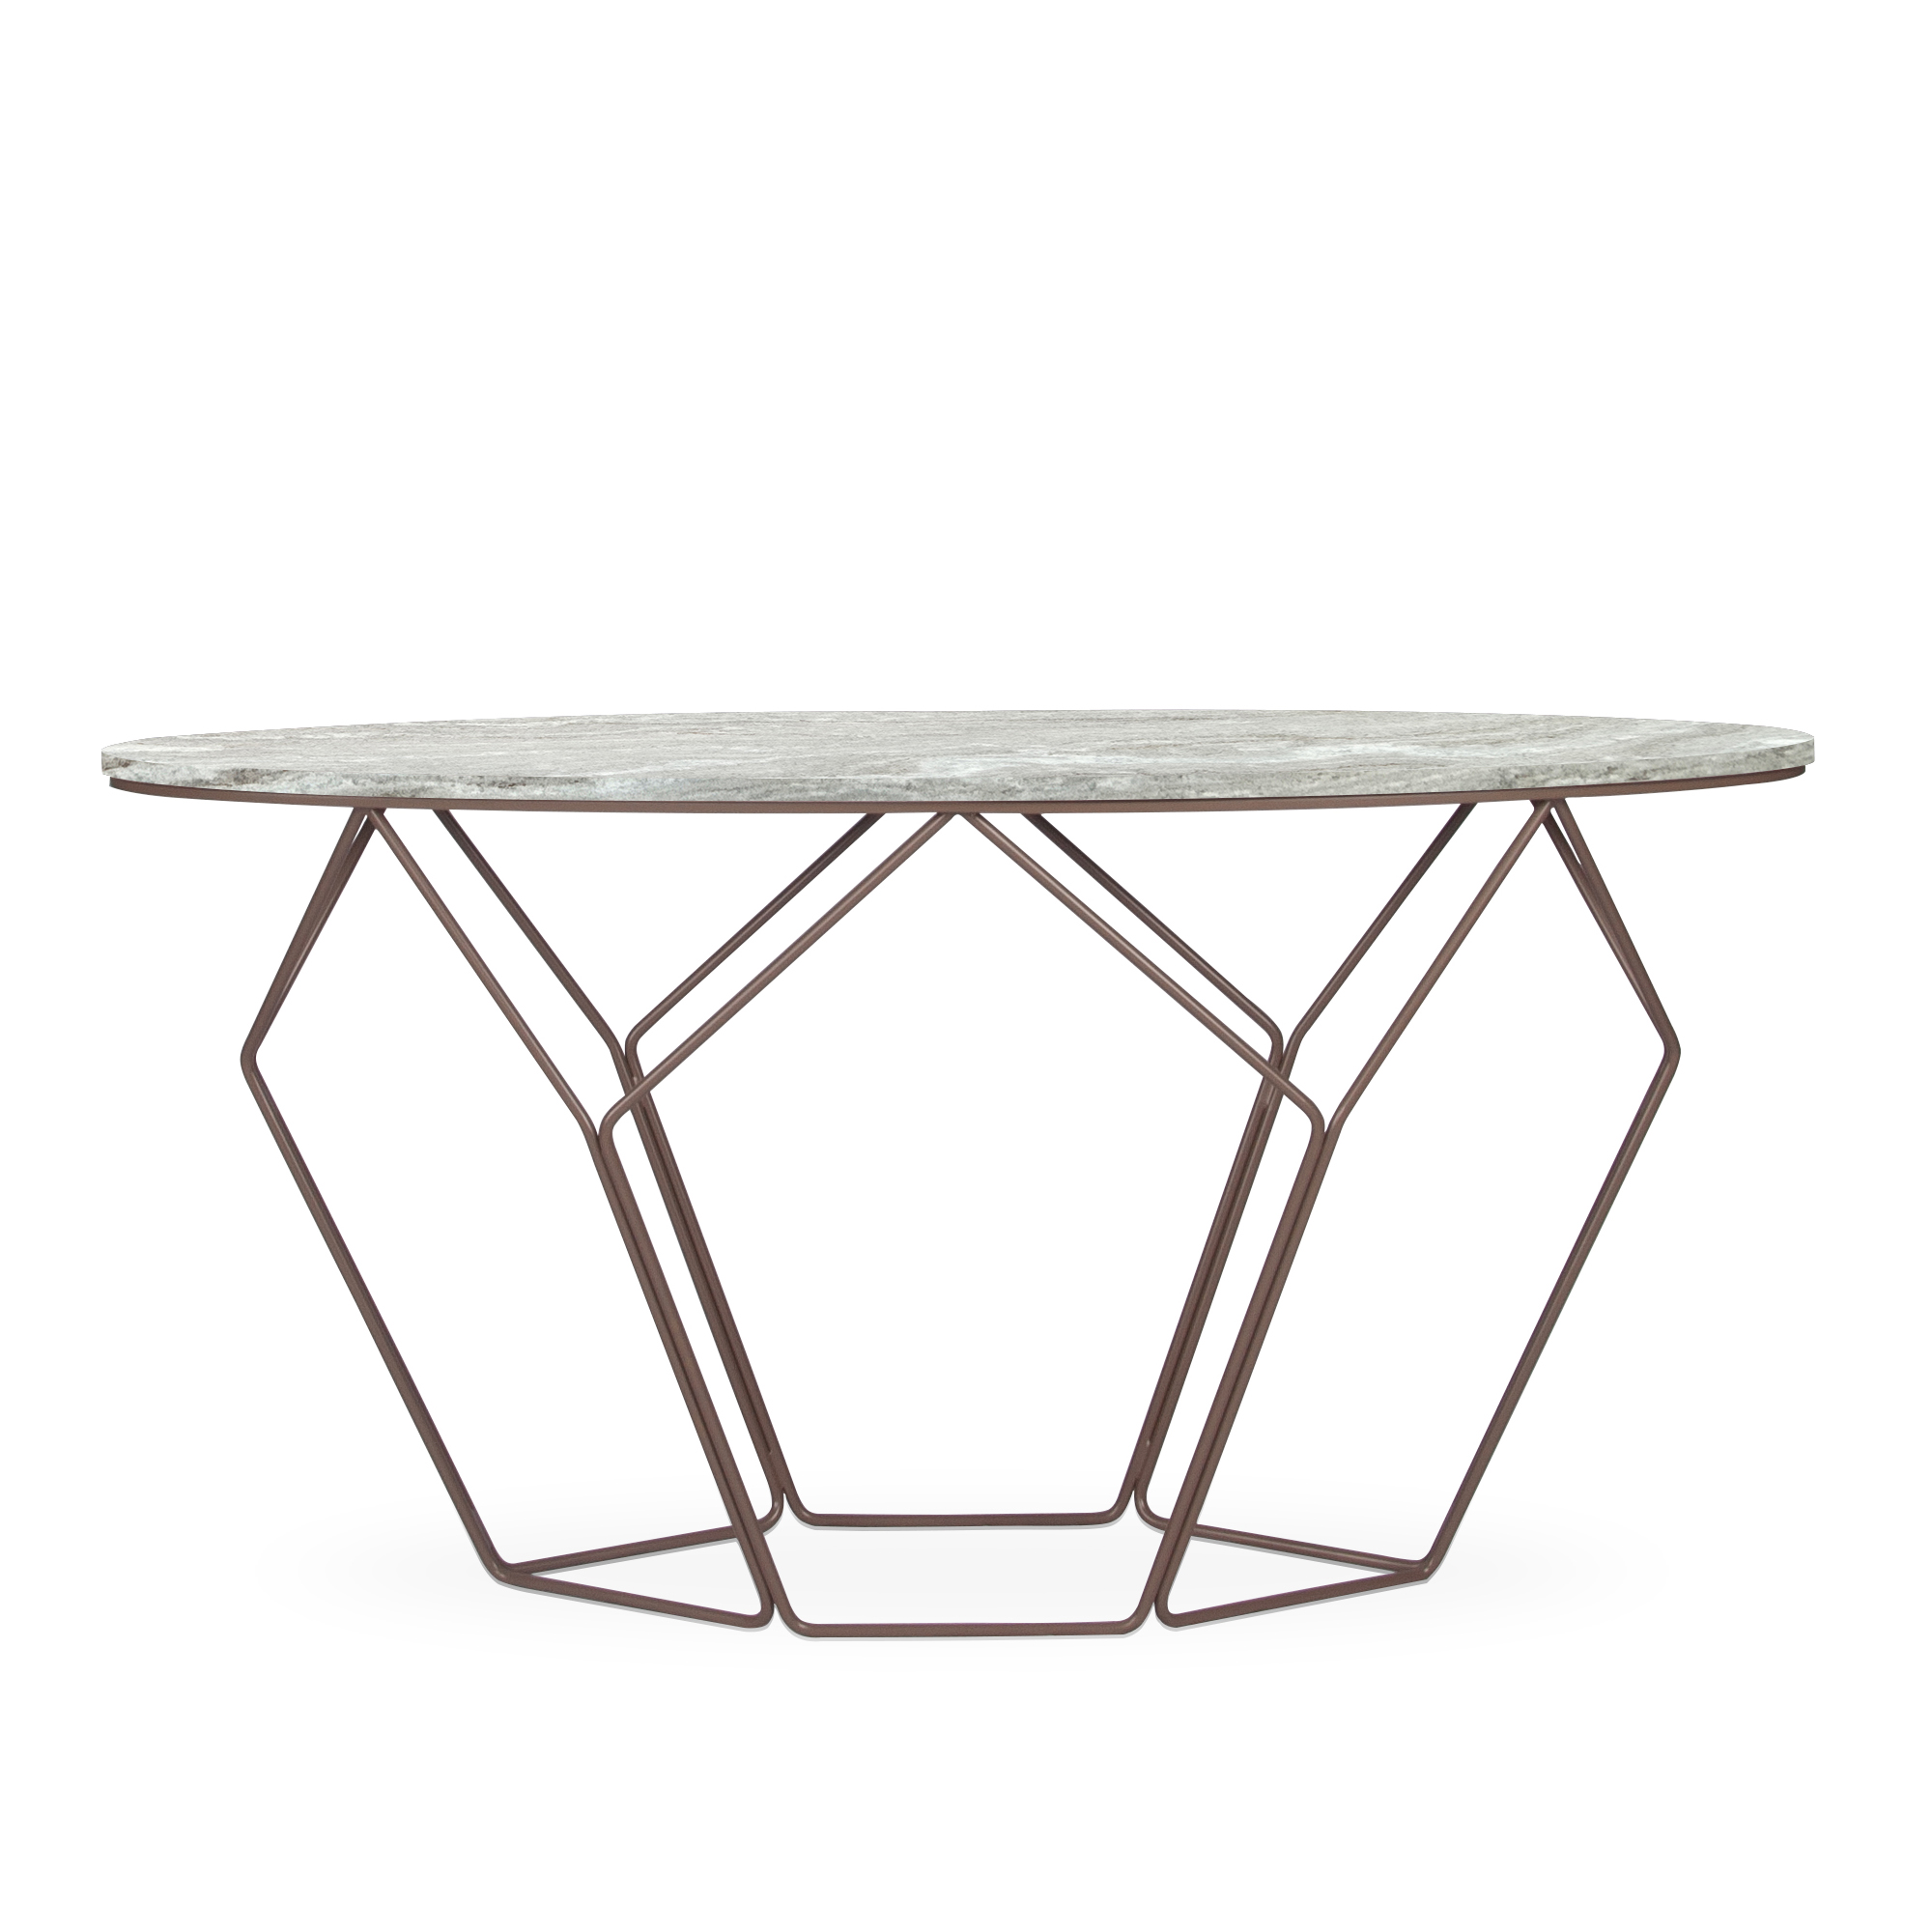 Semper W | Art Series | Decasa Marble Marble Dining Table